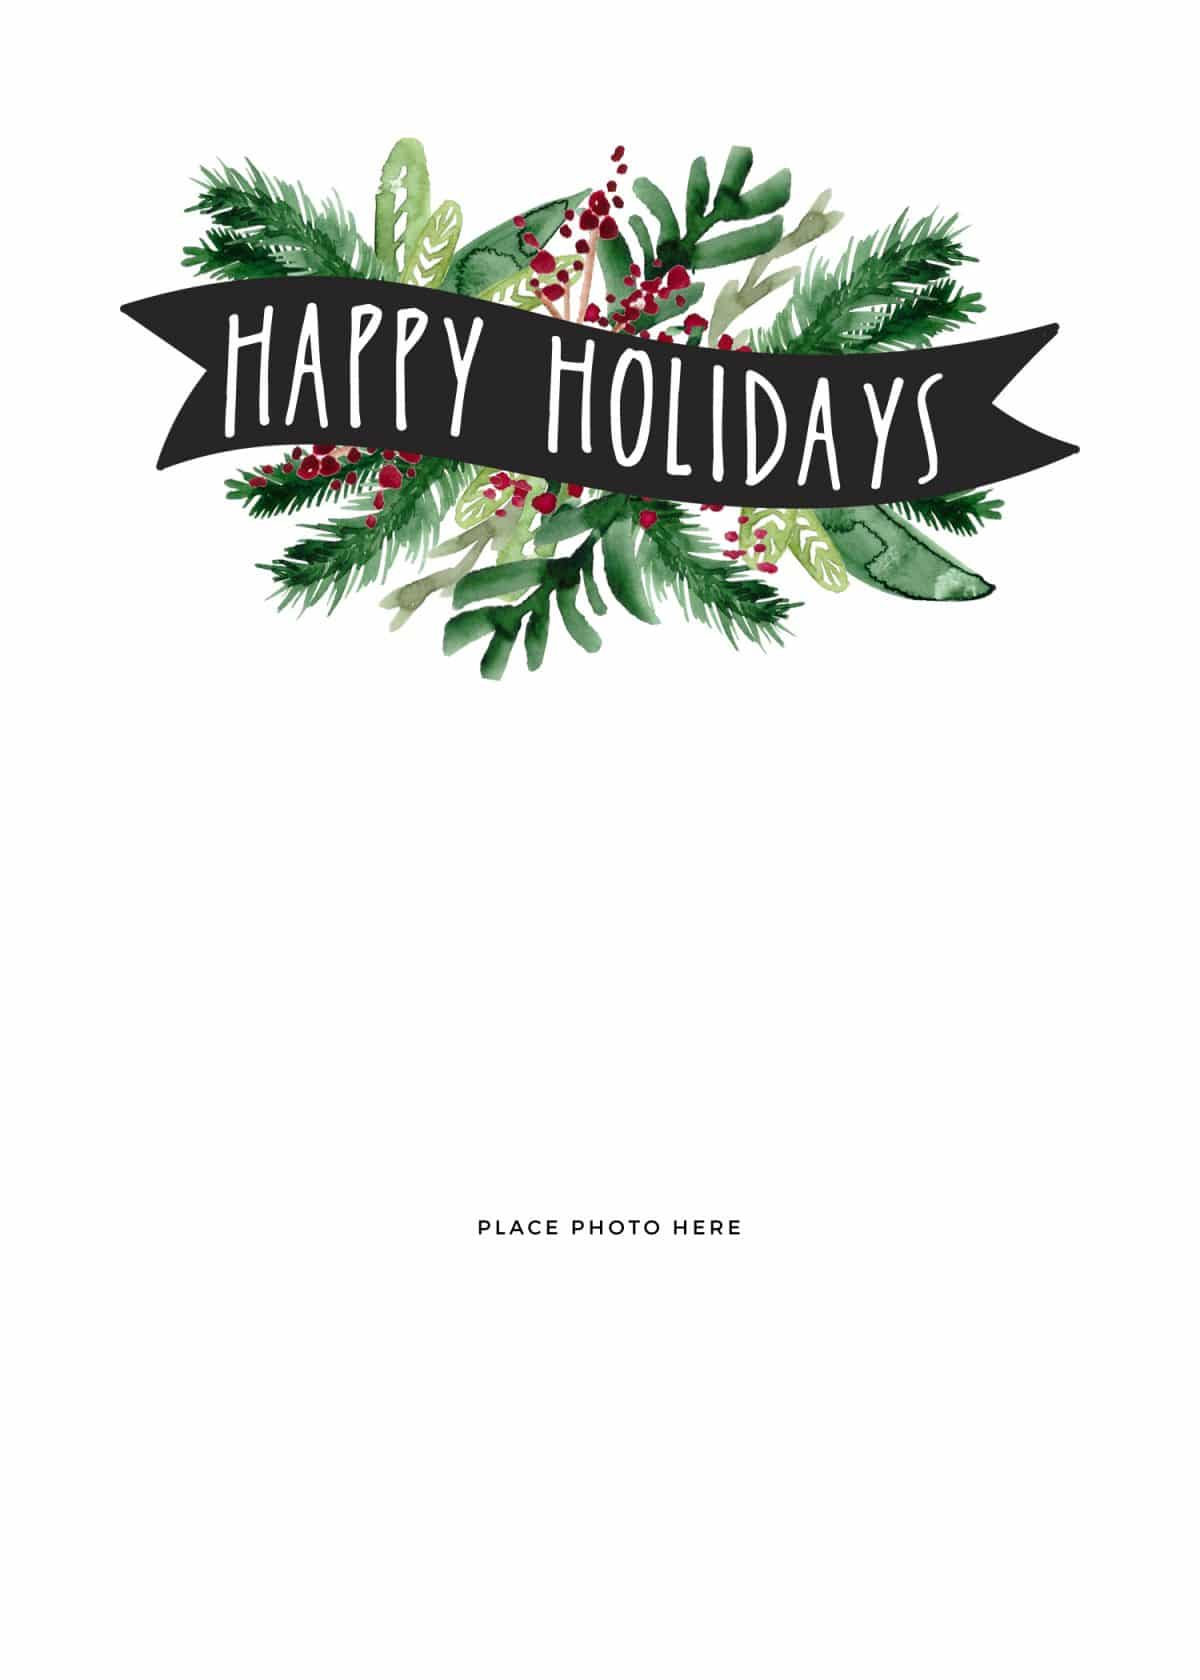 Make Your Own Photo Christmas Cards (For Free!) - Somewhat Throughout Happy Holidays Card Template